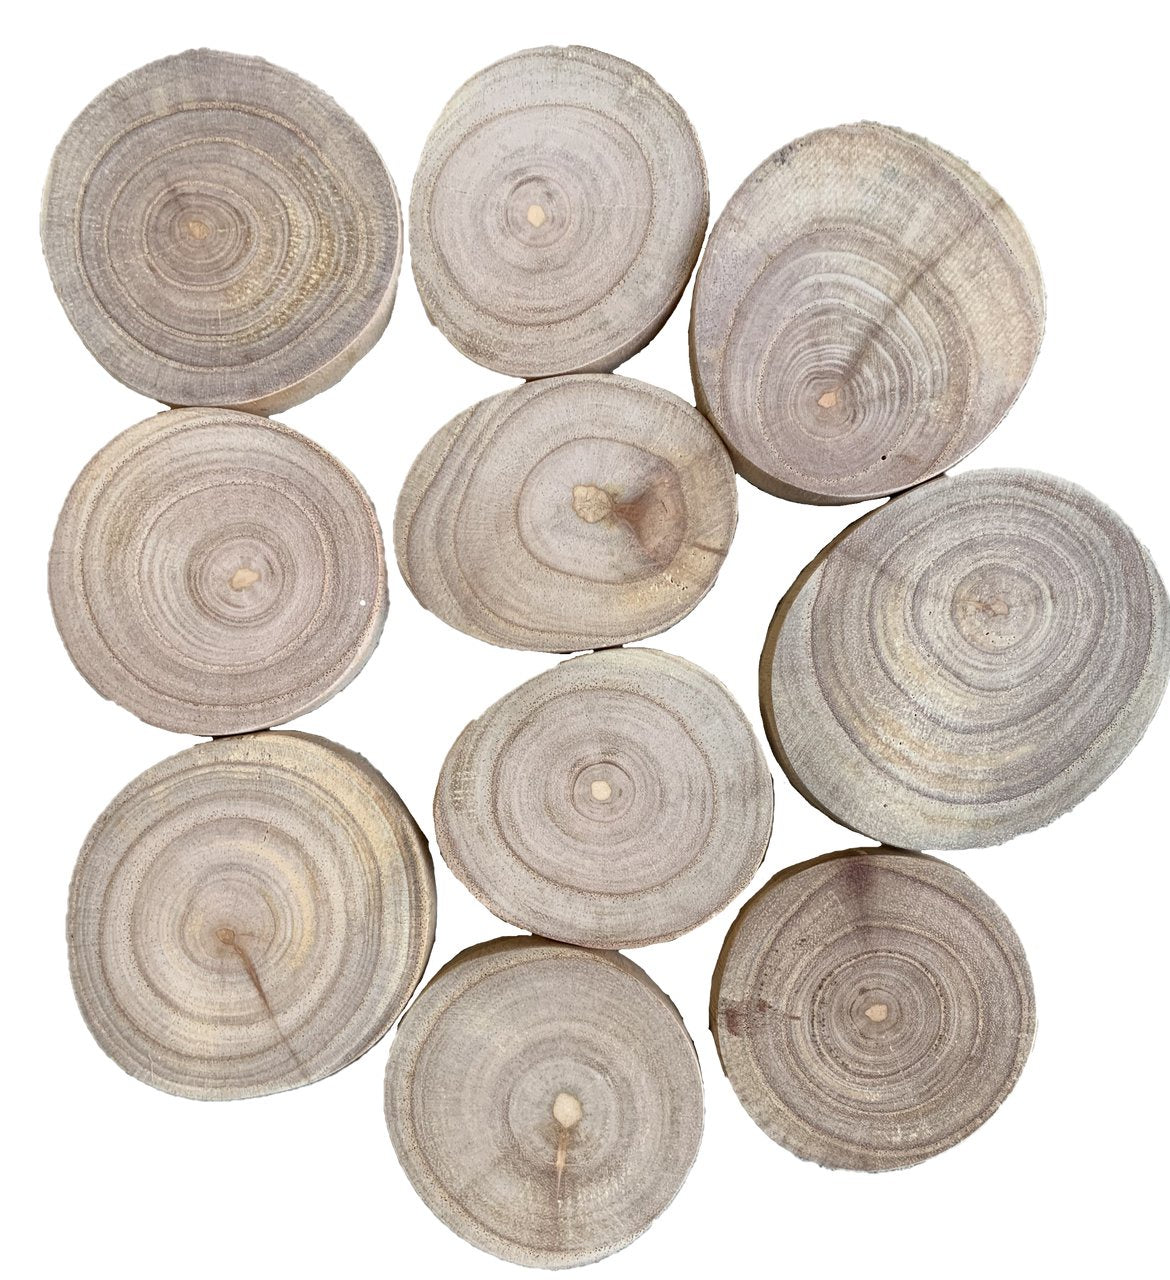 PAPOOSE Loose Parts - Jempini Wood Slices 10pc